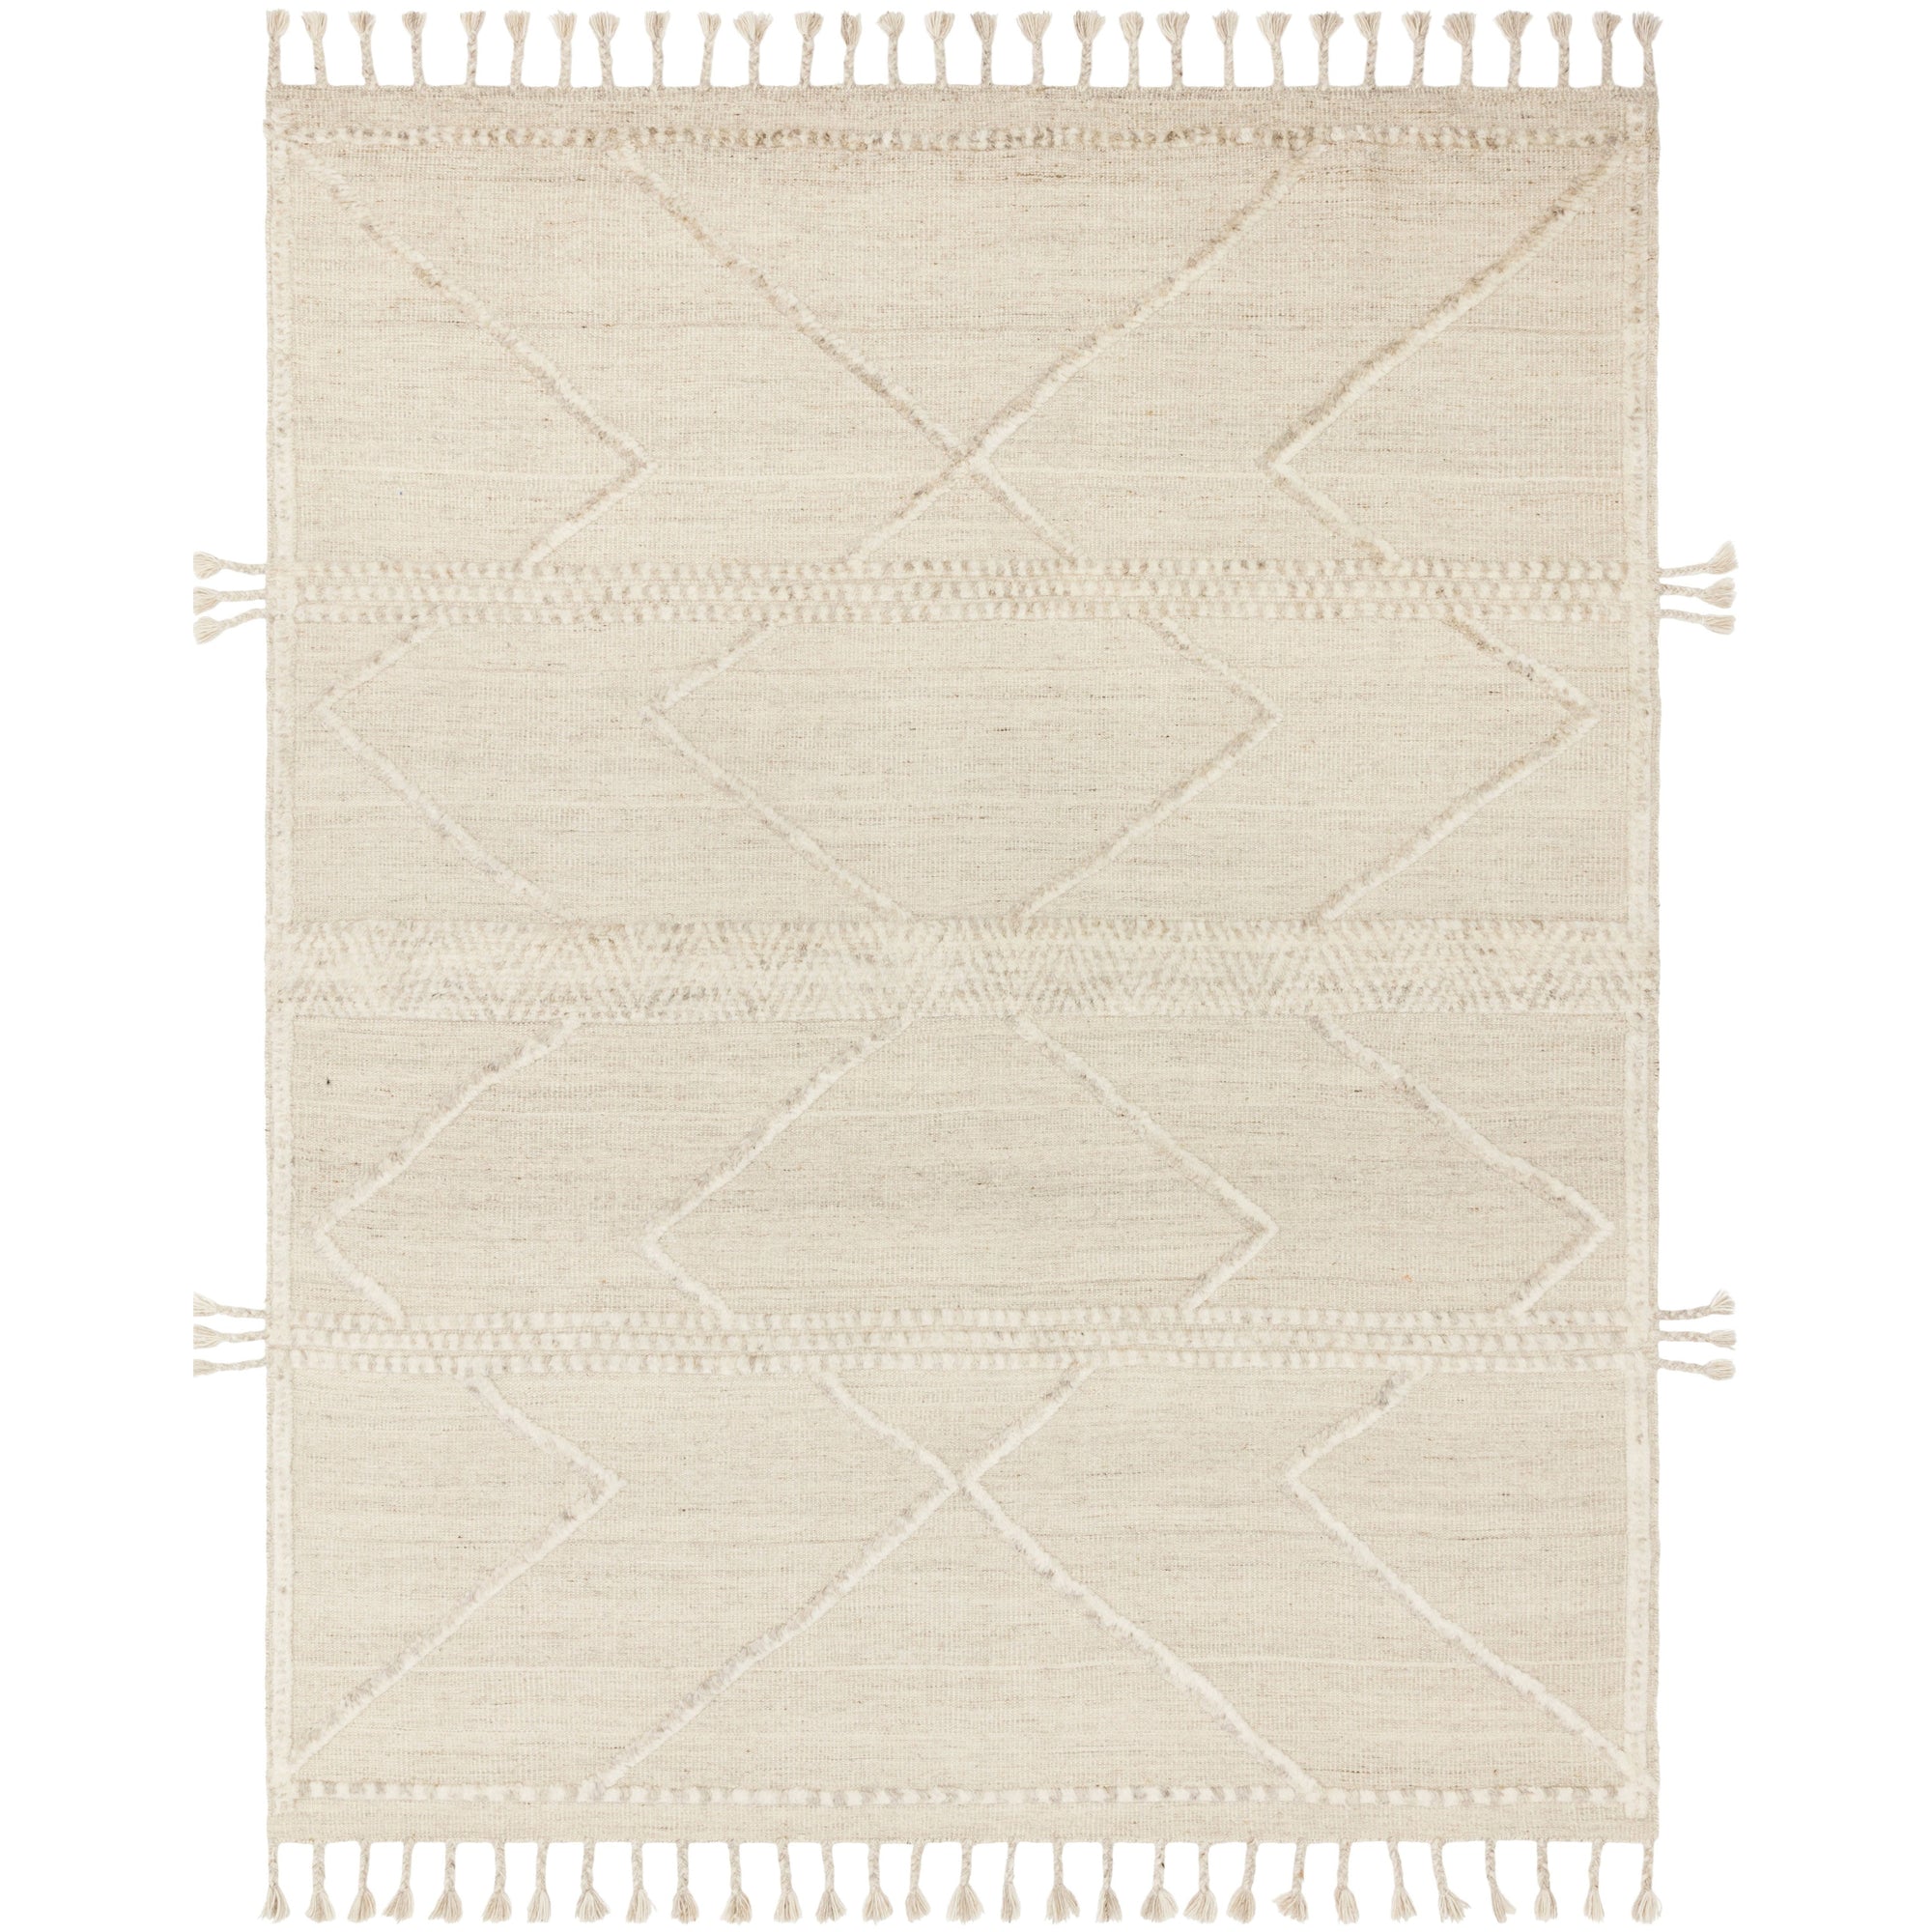 Rugs by Roo Loloi Iman Beige Ivory Area Rug in size 18" x 18" Sample